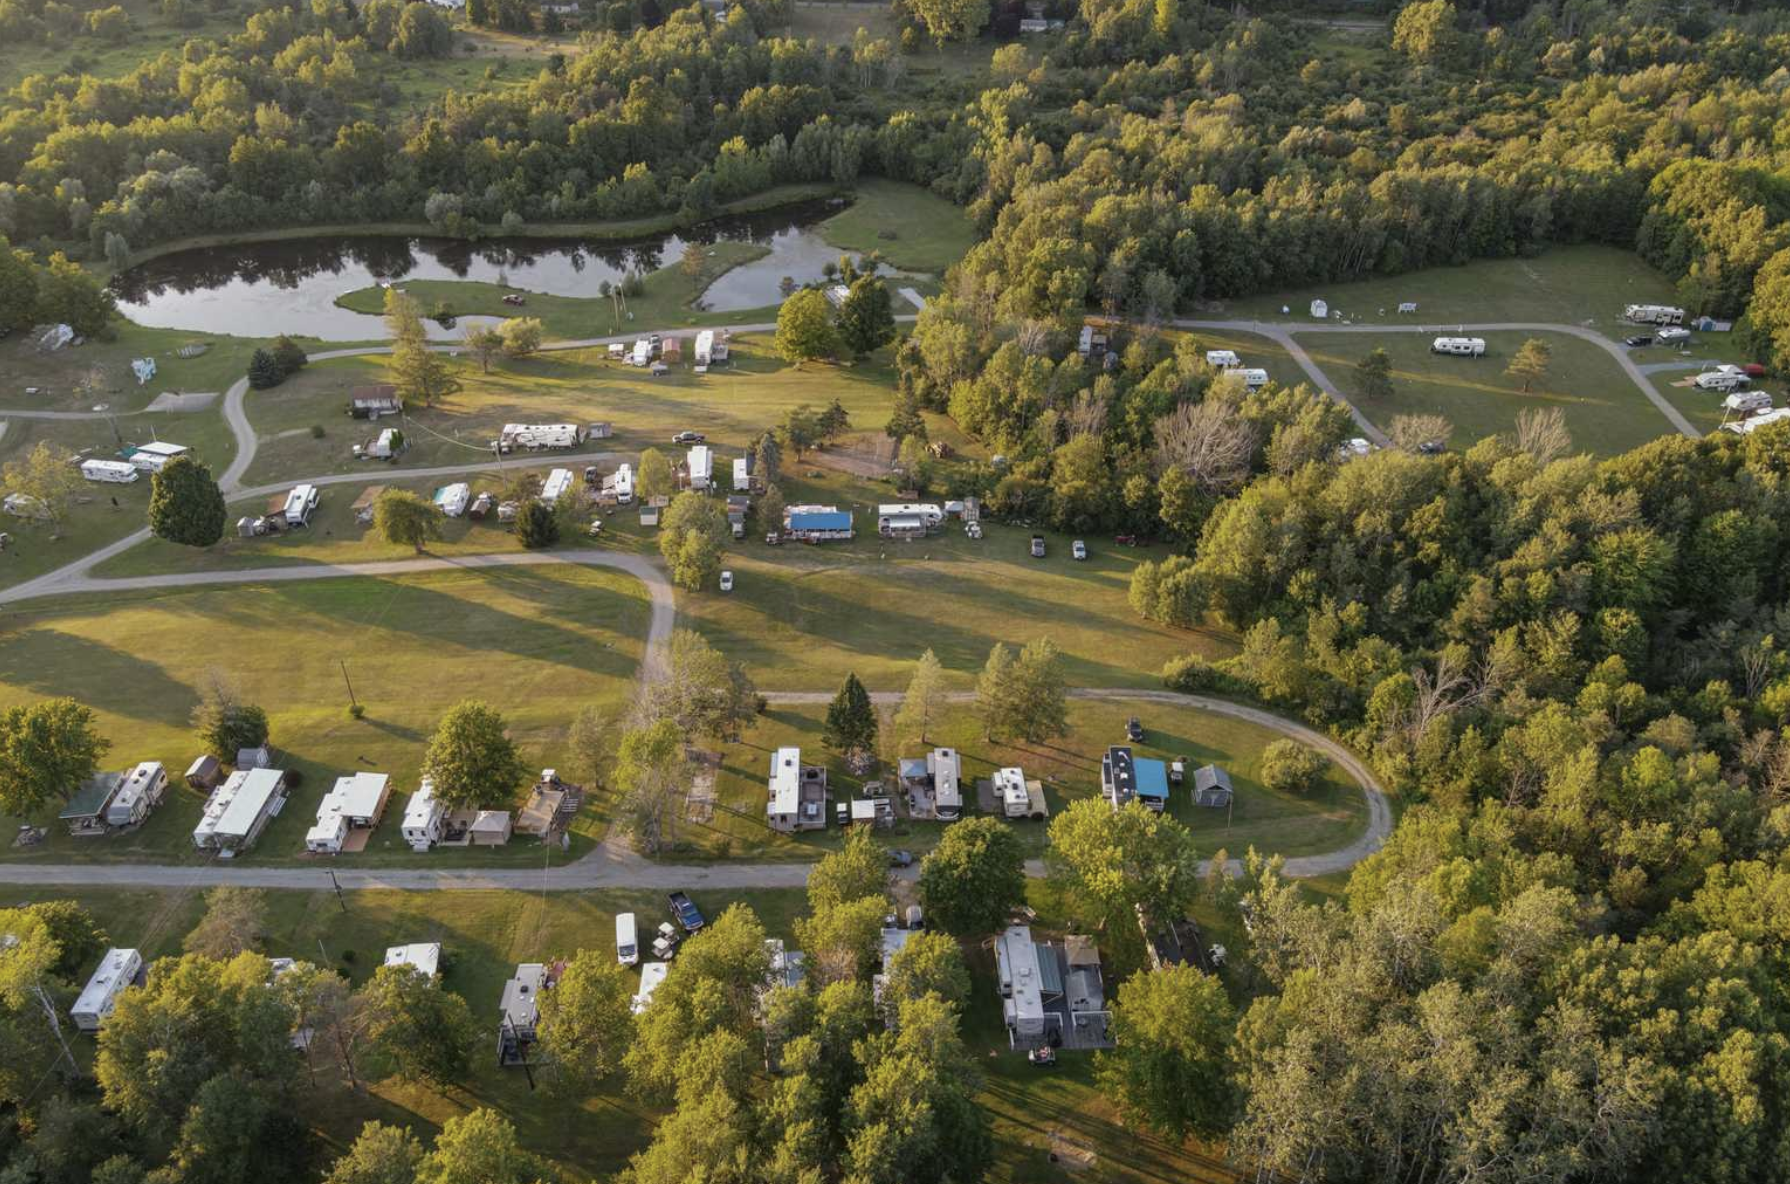 10 Best Campgrounds in New York